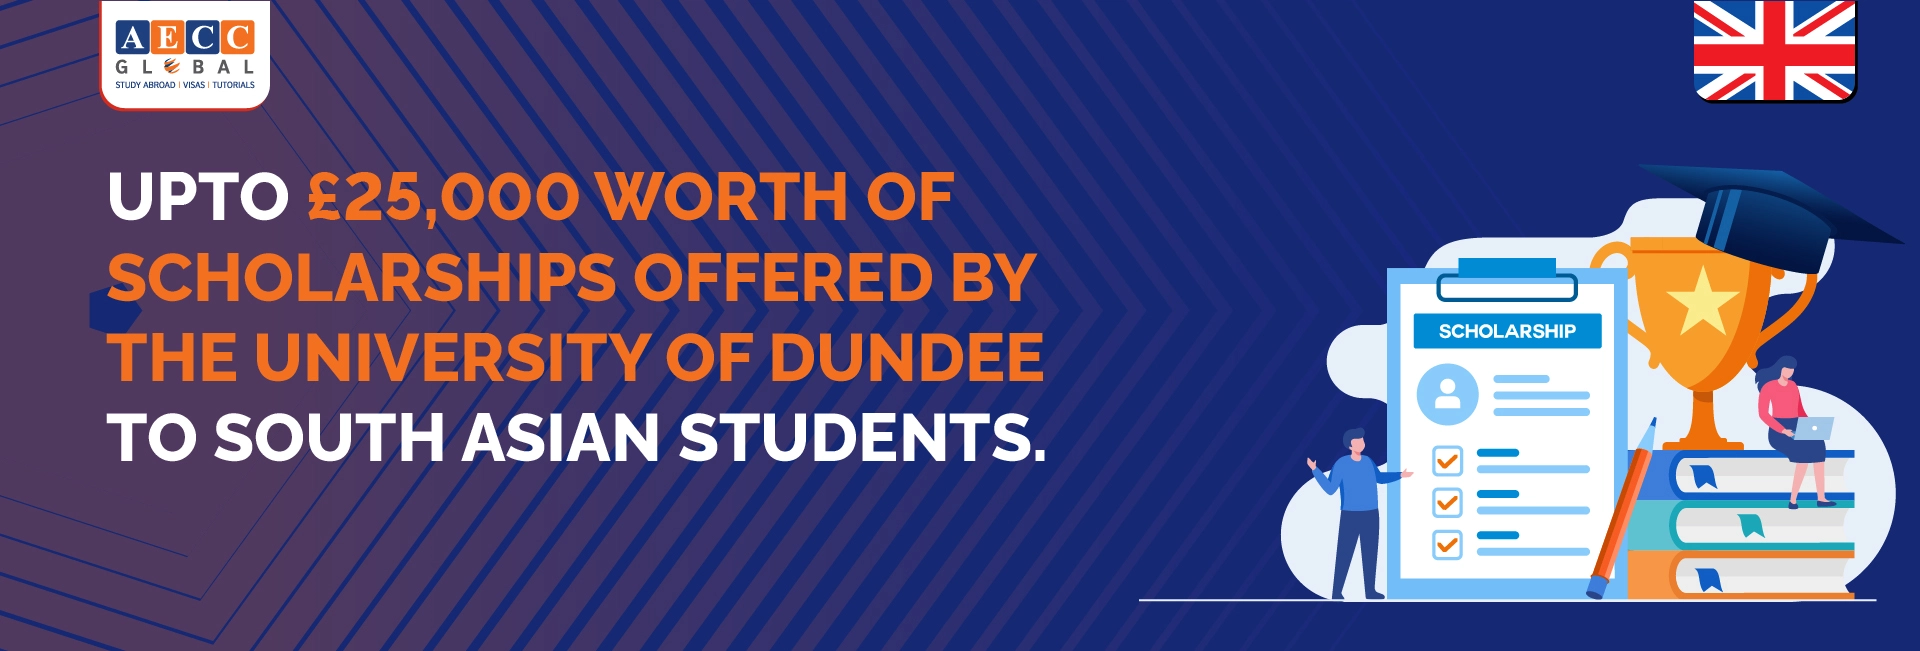 Upto £25,000 worth of Scholarships offered by the University Of Dundee to South Asian Students